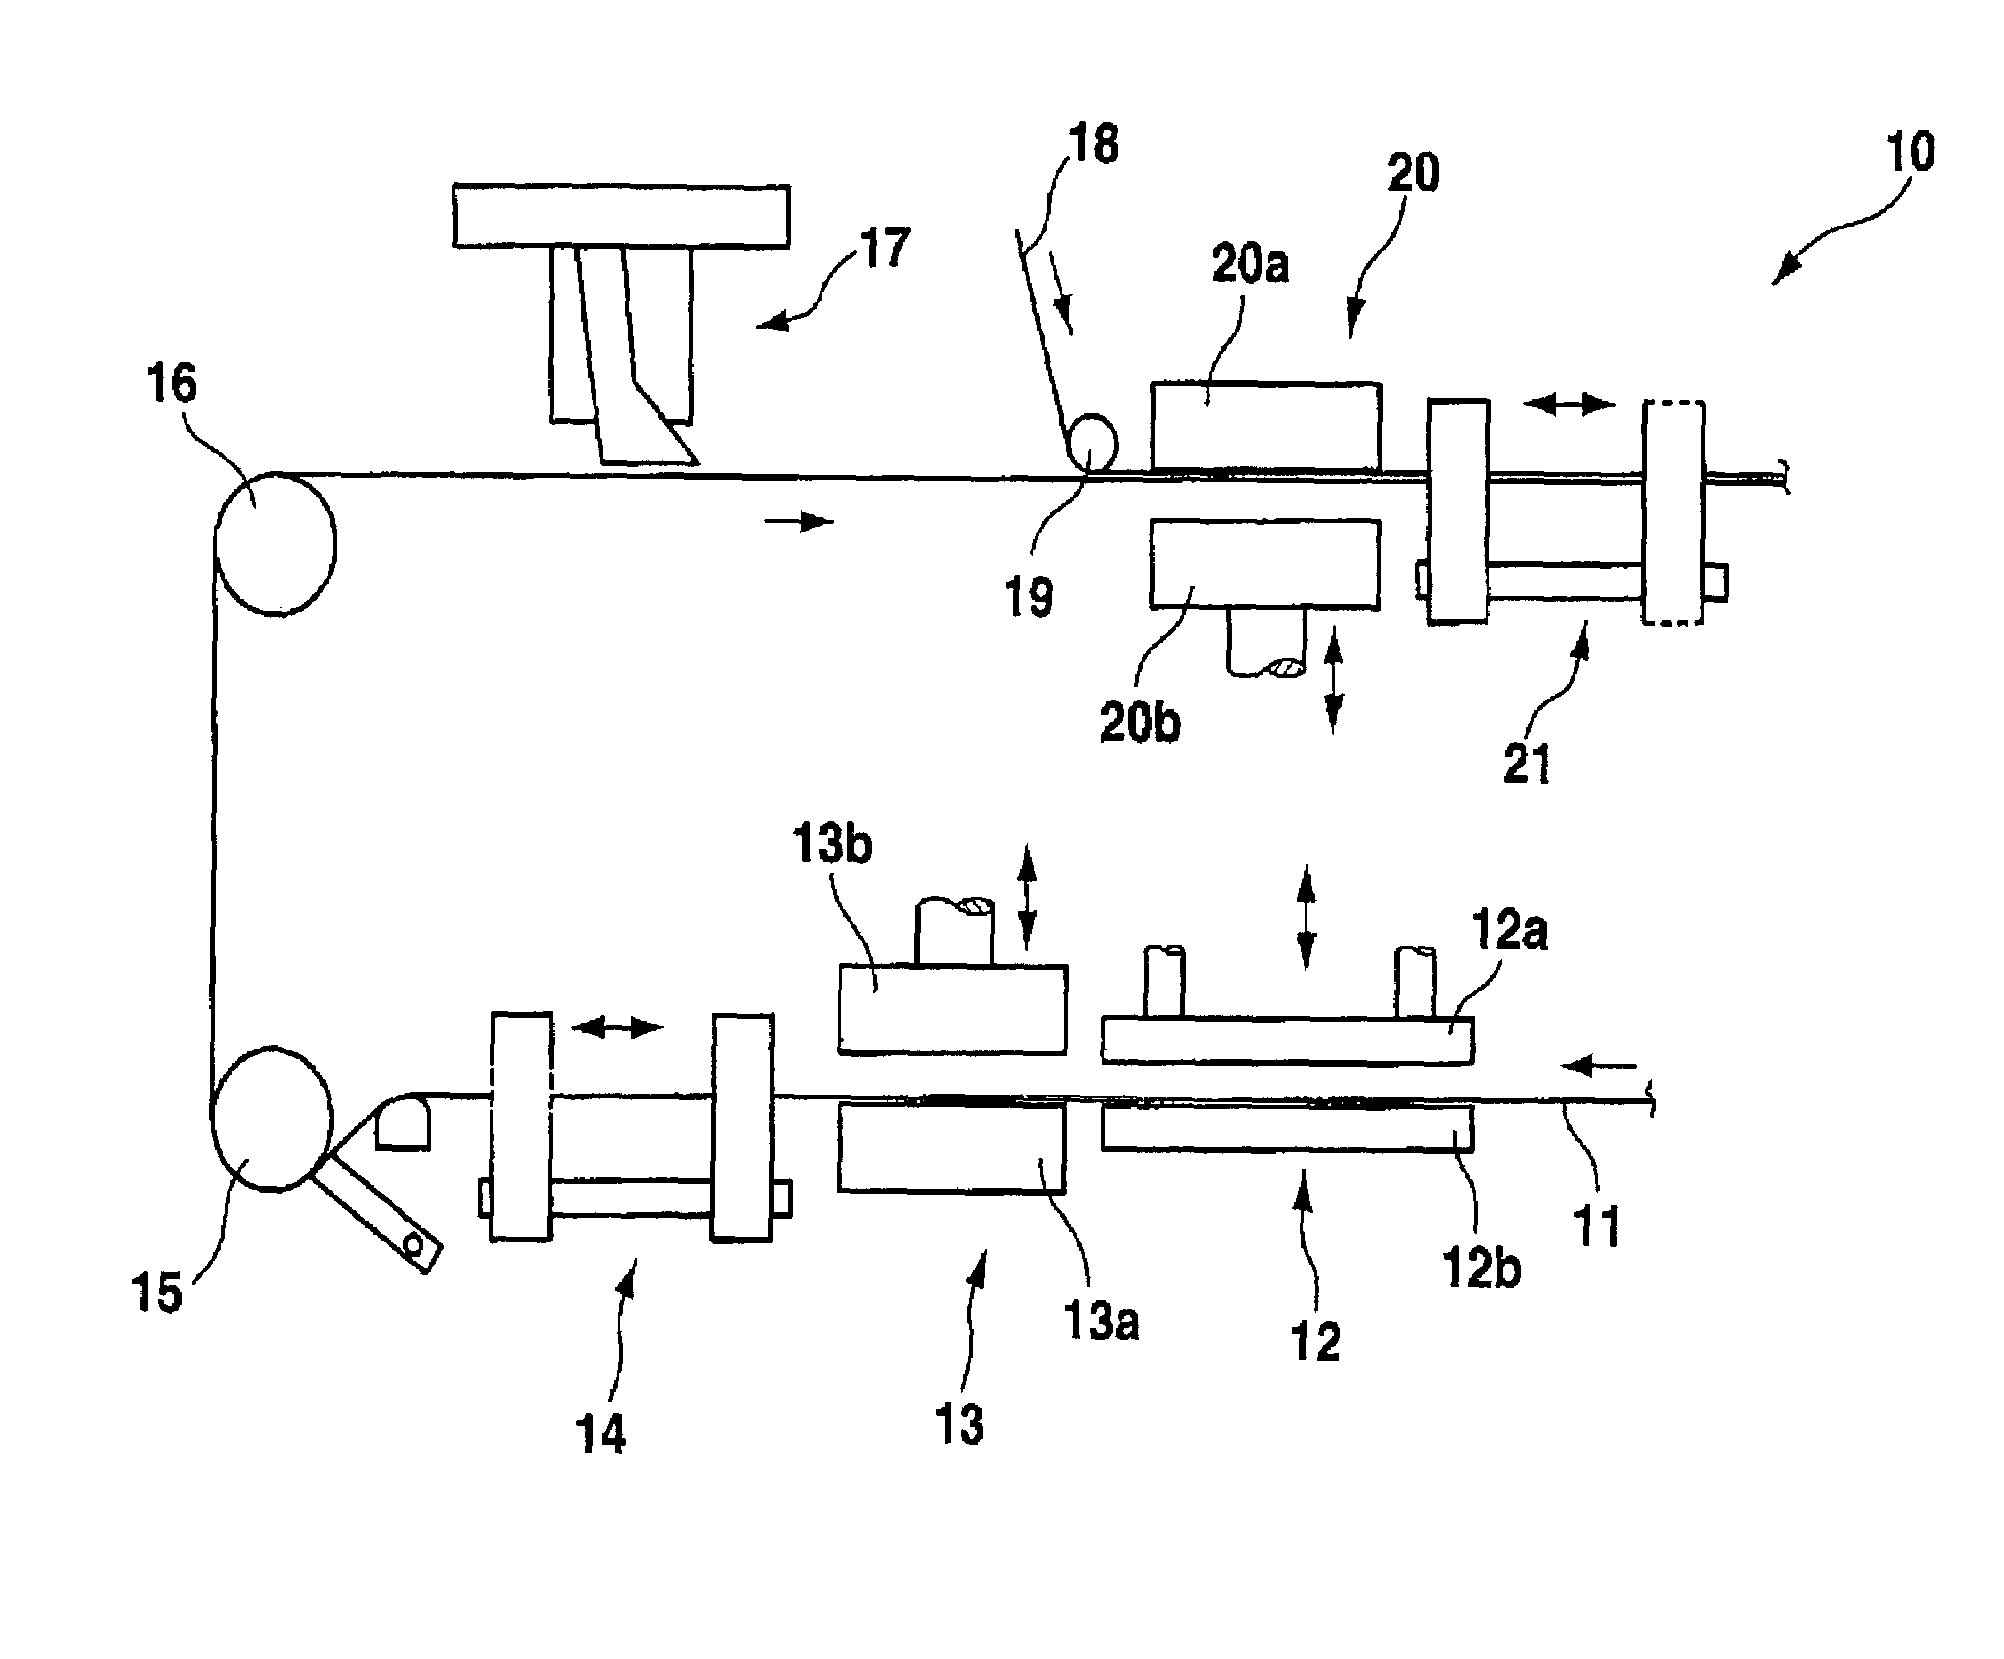 Method for controlling a blister packaging machine